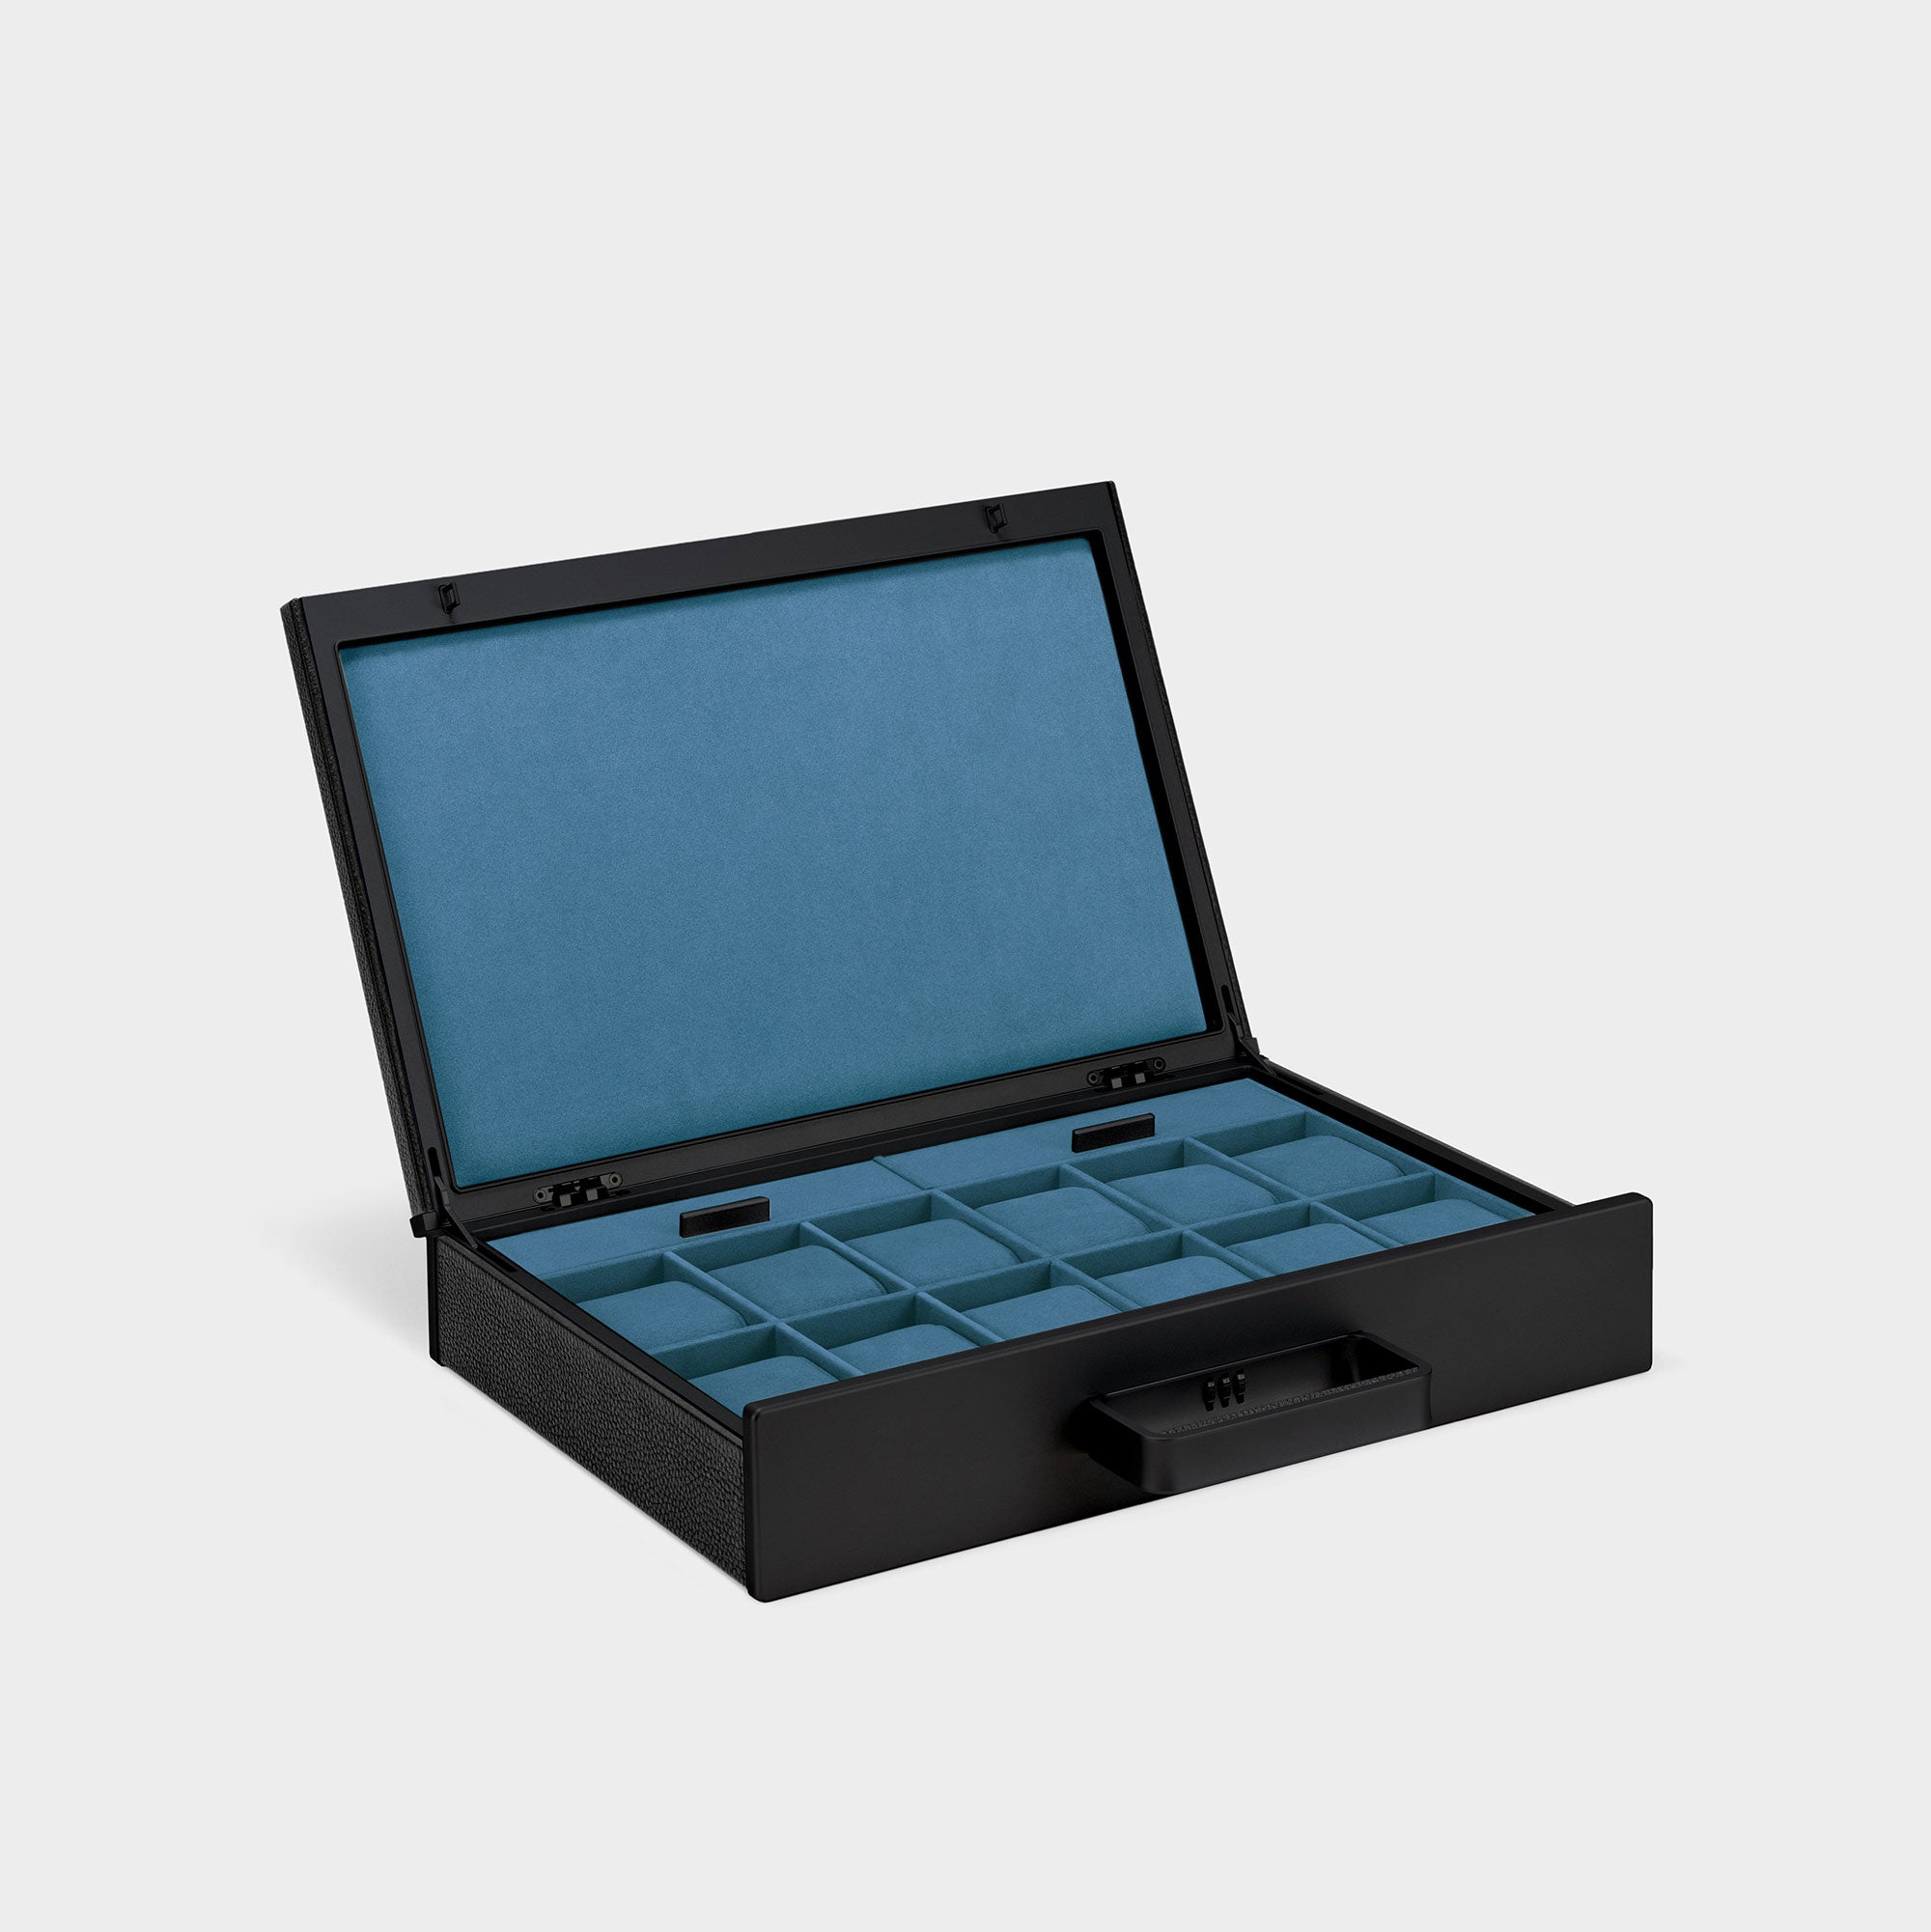 Charles Simon Mackenzie 12 watch briefcase in all black with Cyan blue interior made from fine leather, aluminum and carbon fiber casing and soft Alcantara interior lining